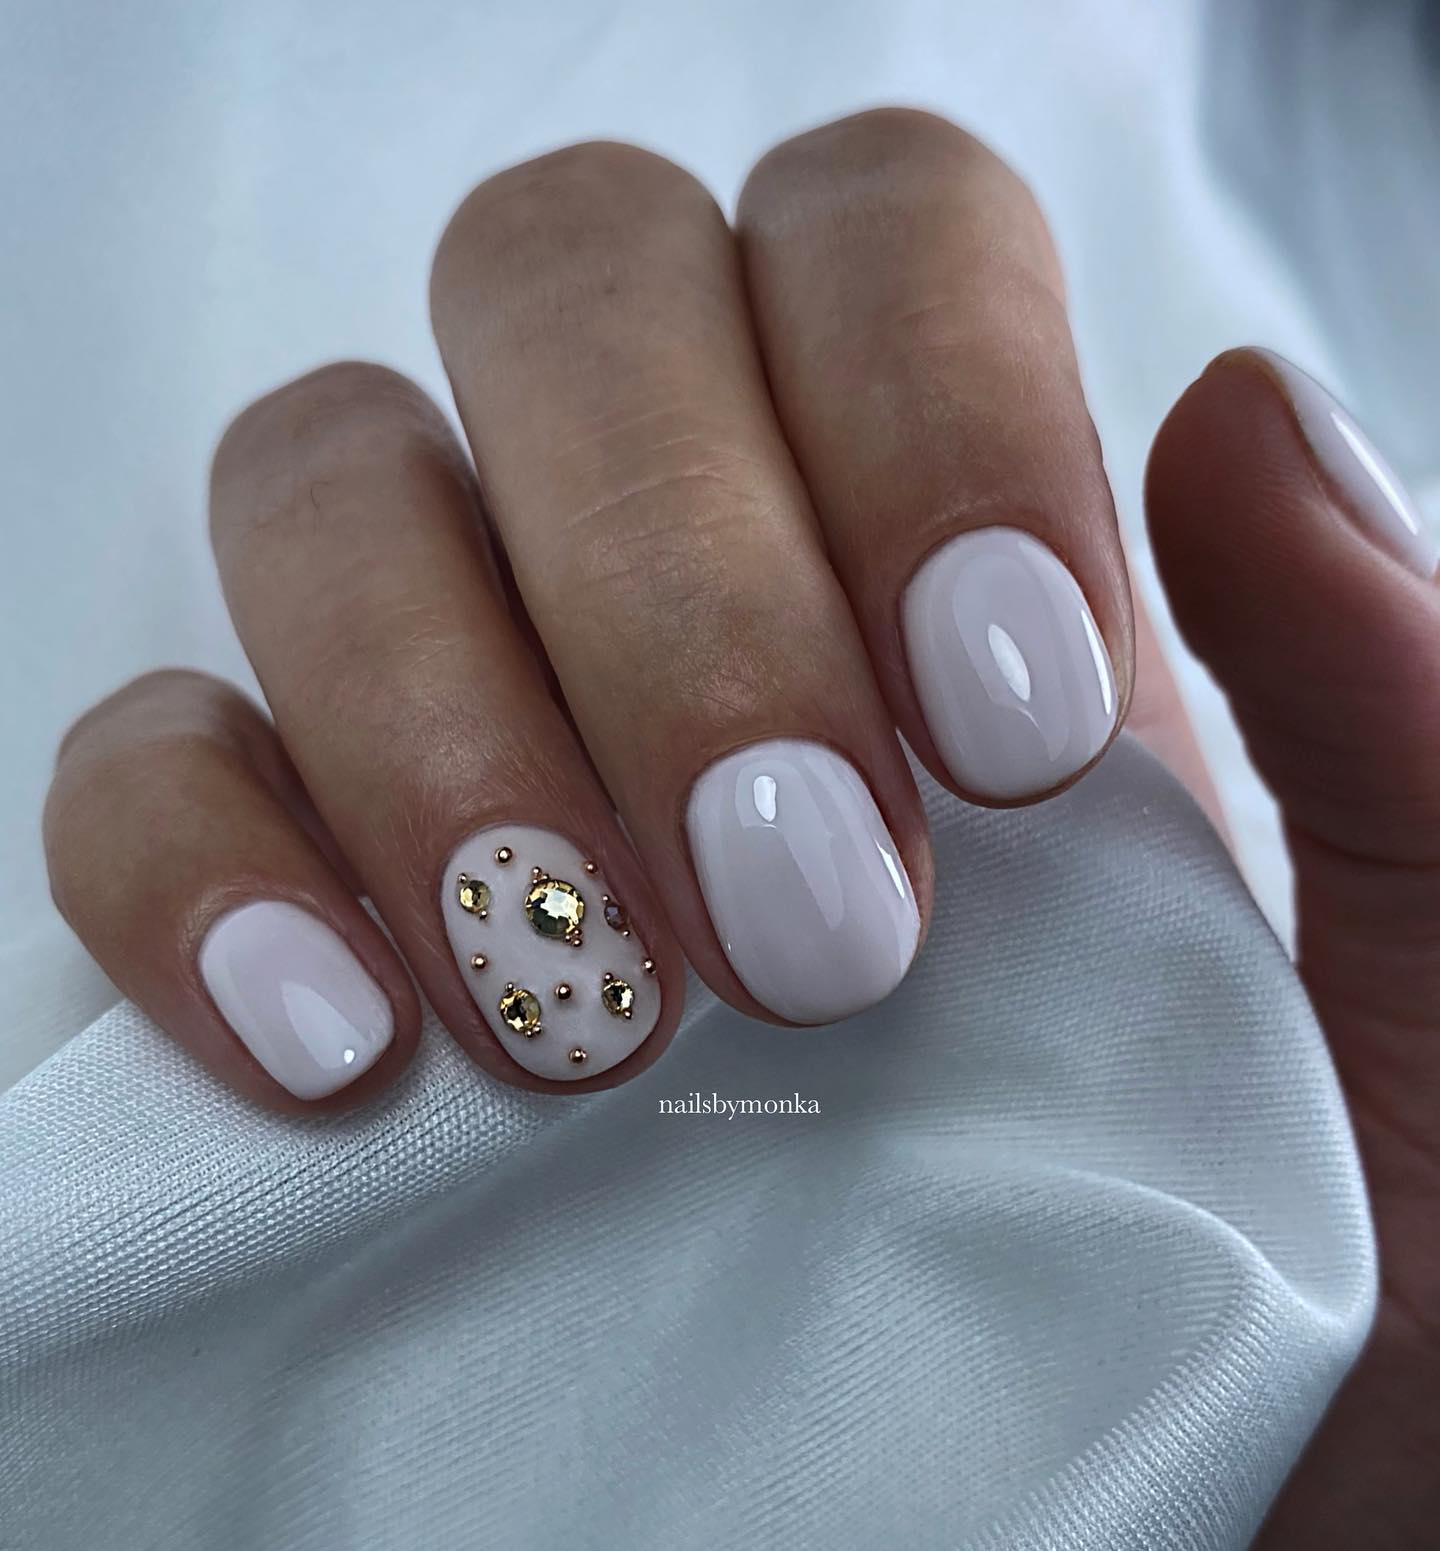 Short White Nails with Rhinestones on Accent Nail